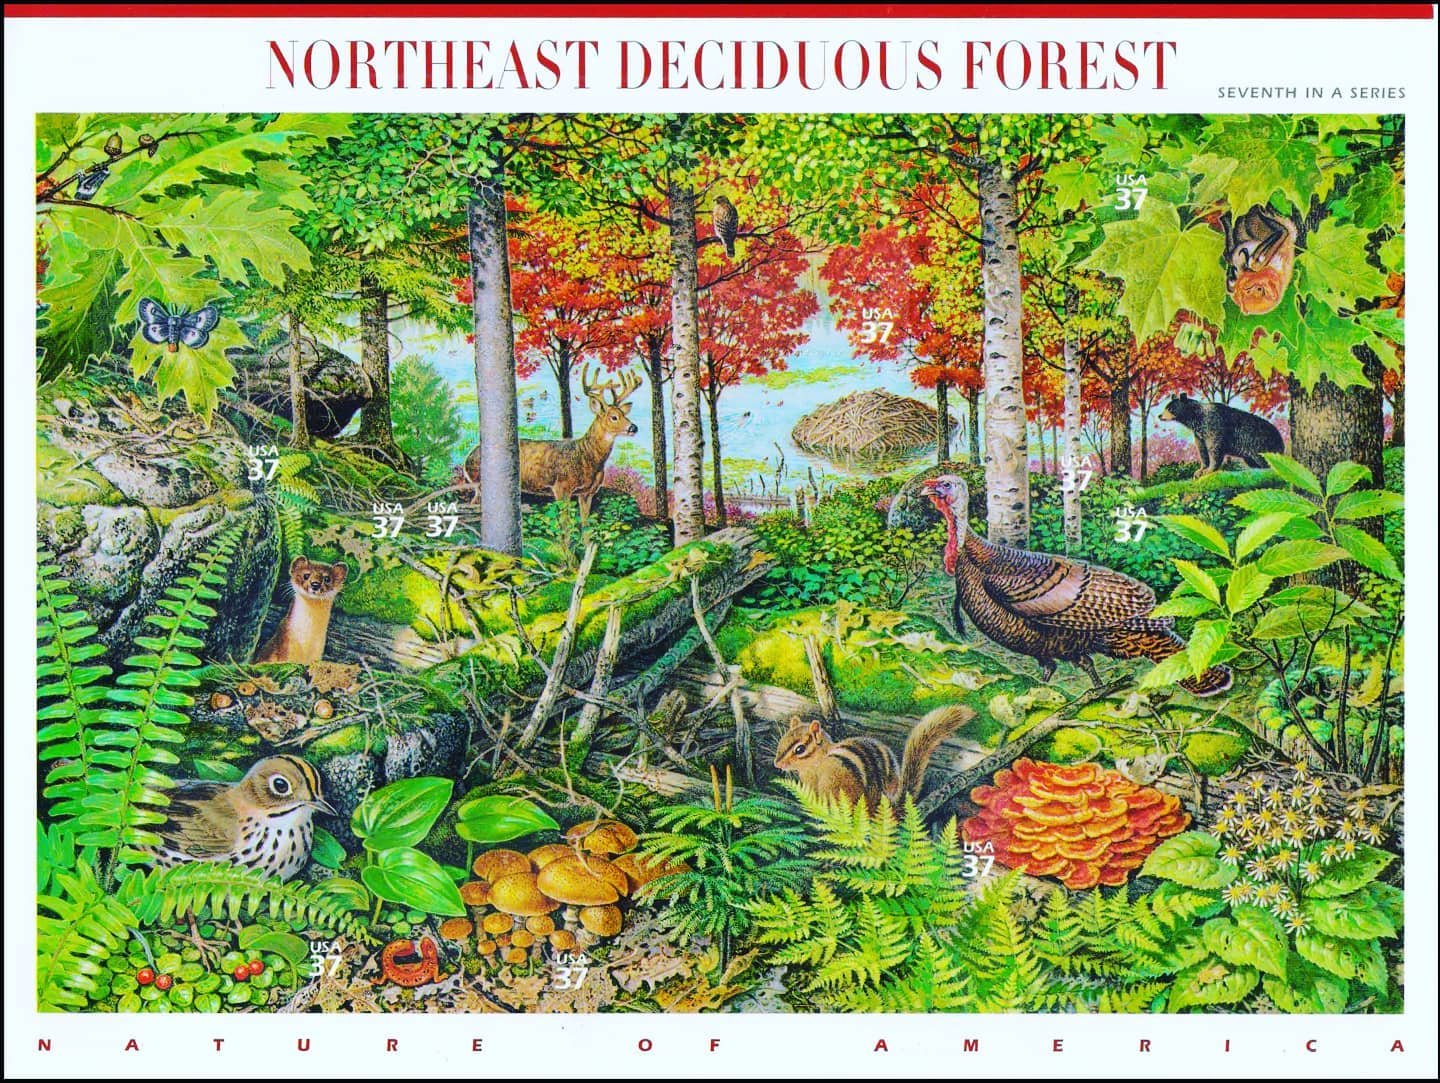 U.S.A. 2005,  Northeast Deciduous Forest, Nature Of America, Flora and Fauna,  Miniature Sheet of 10 stamps, Self Adhesive, Description on Back, MNH